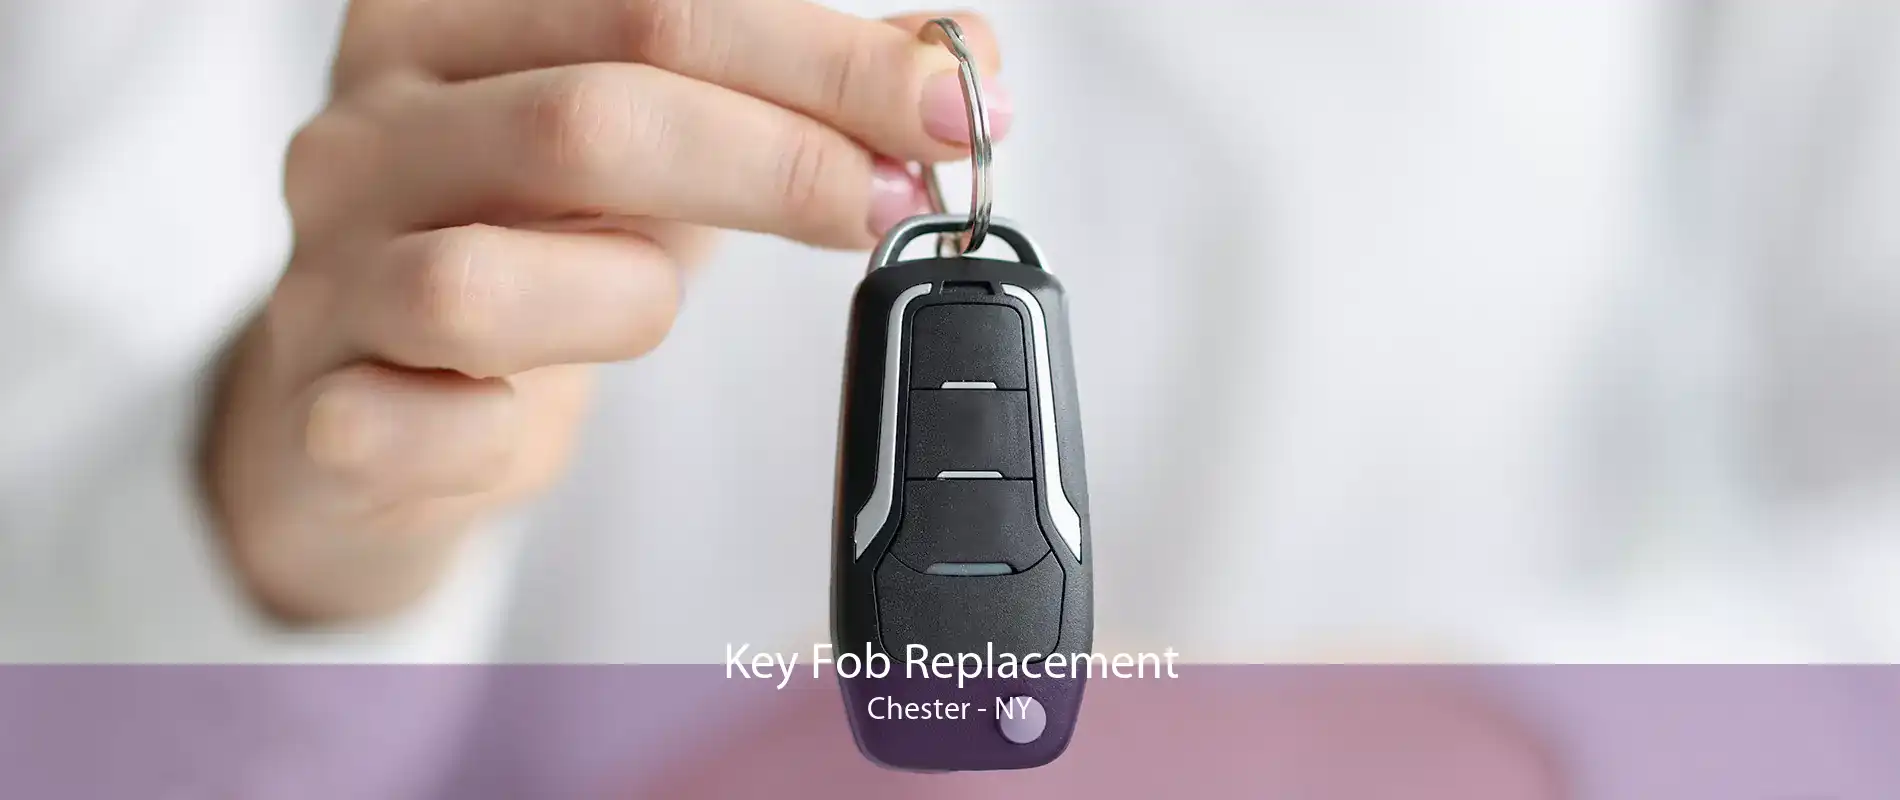 Key Fob Replacement Chester - NY